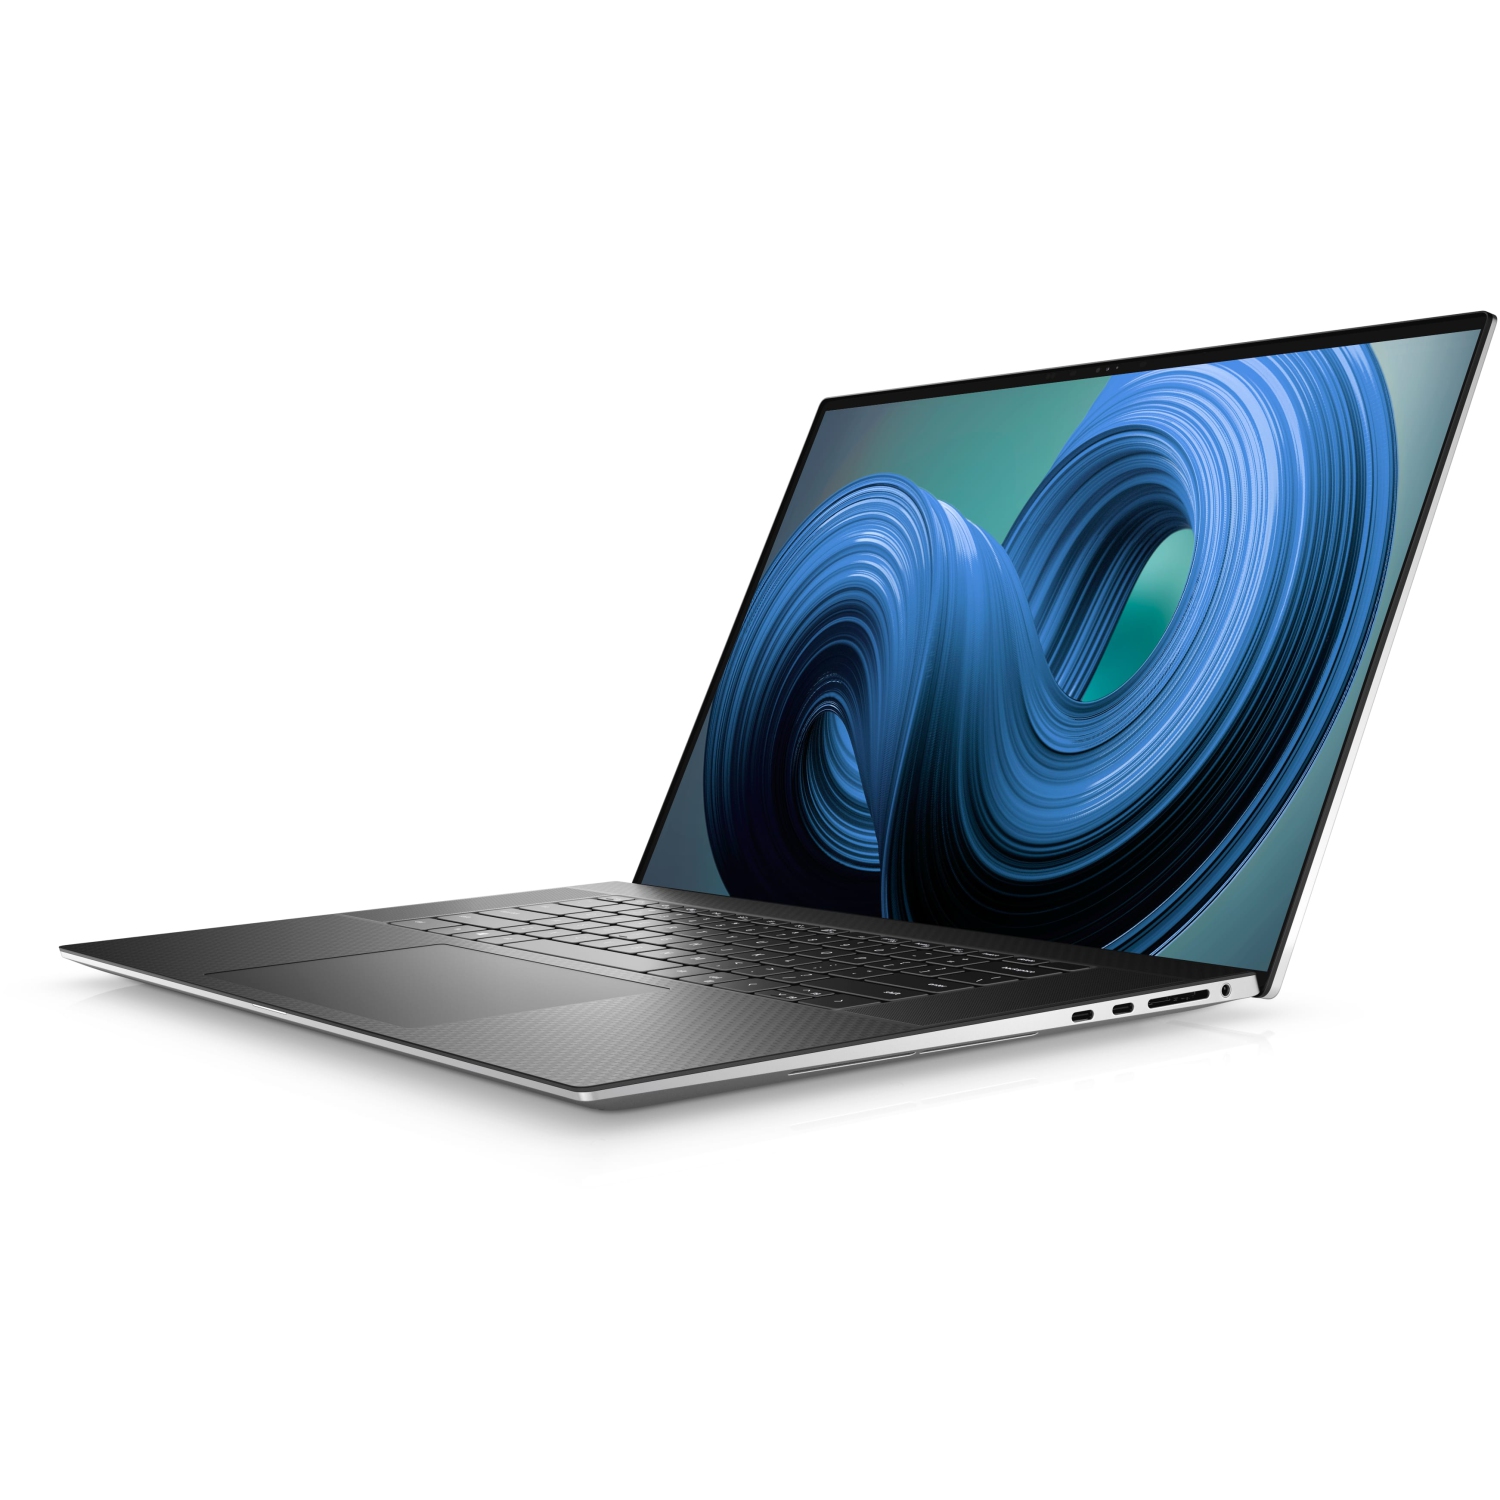 Refurbished (Excellent) – Dell XPS 9720 Laptop (2022) | 17" 4K Touch | Core i7 - 2TB SSD - 16GB RAM - RTX 3050 | 14 Cores @ 4.7 GHz - 12th Gen CPU